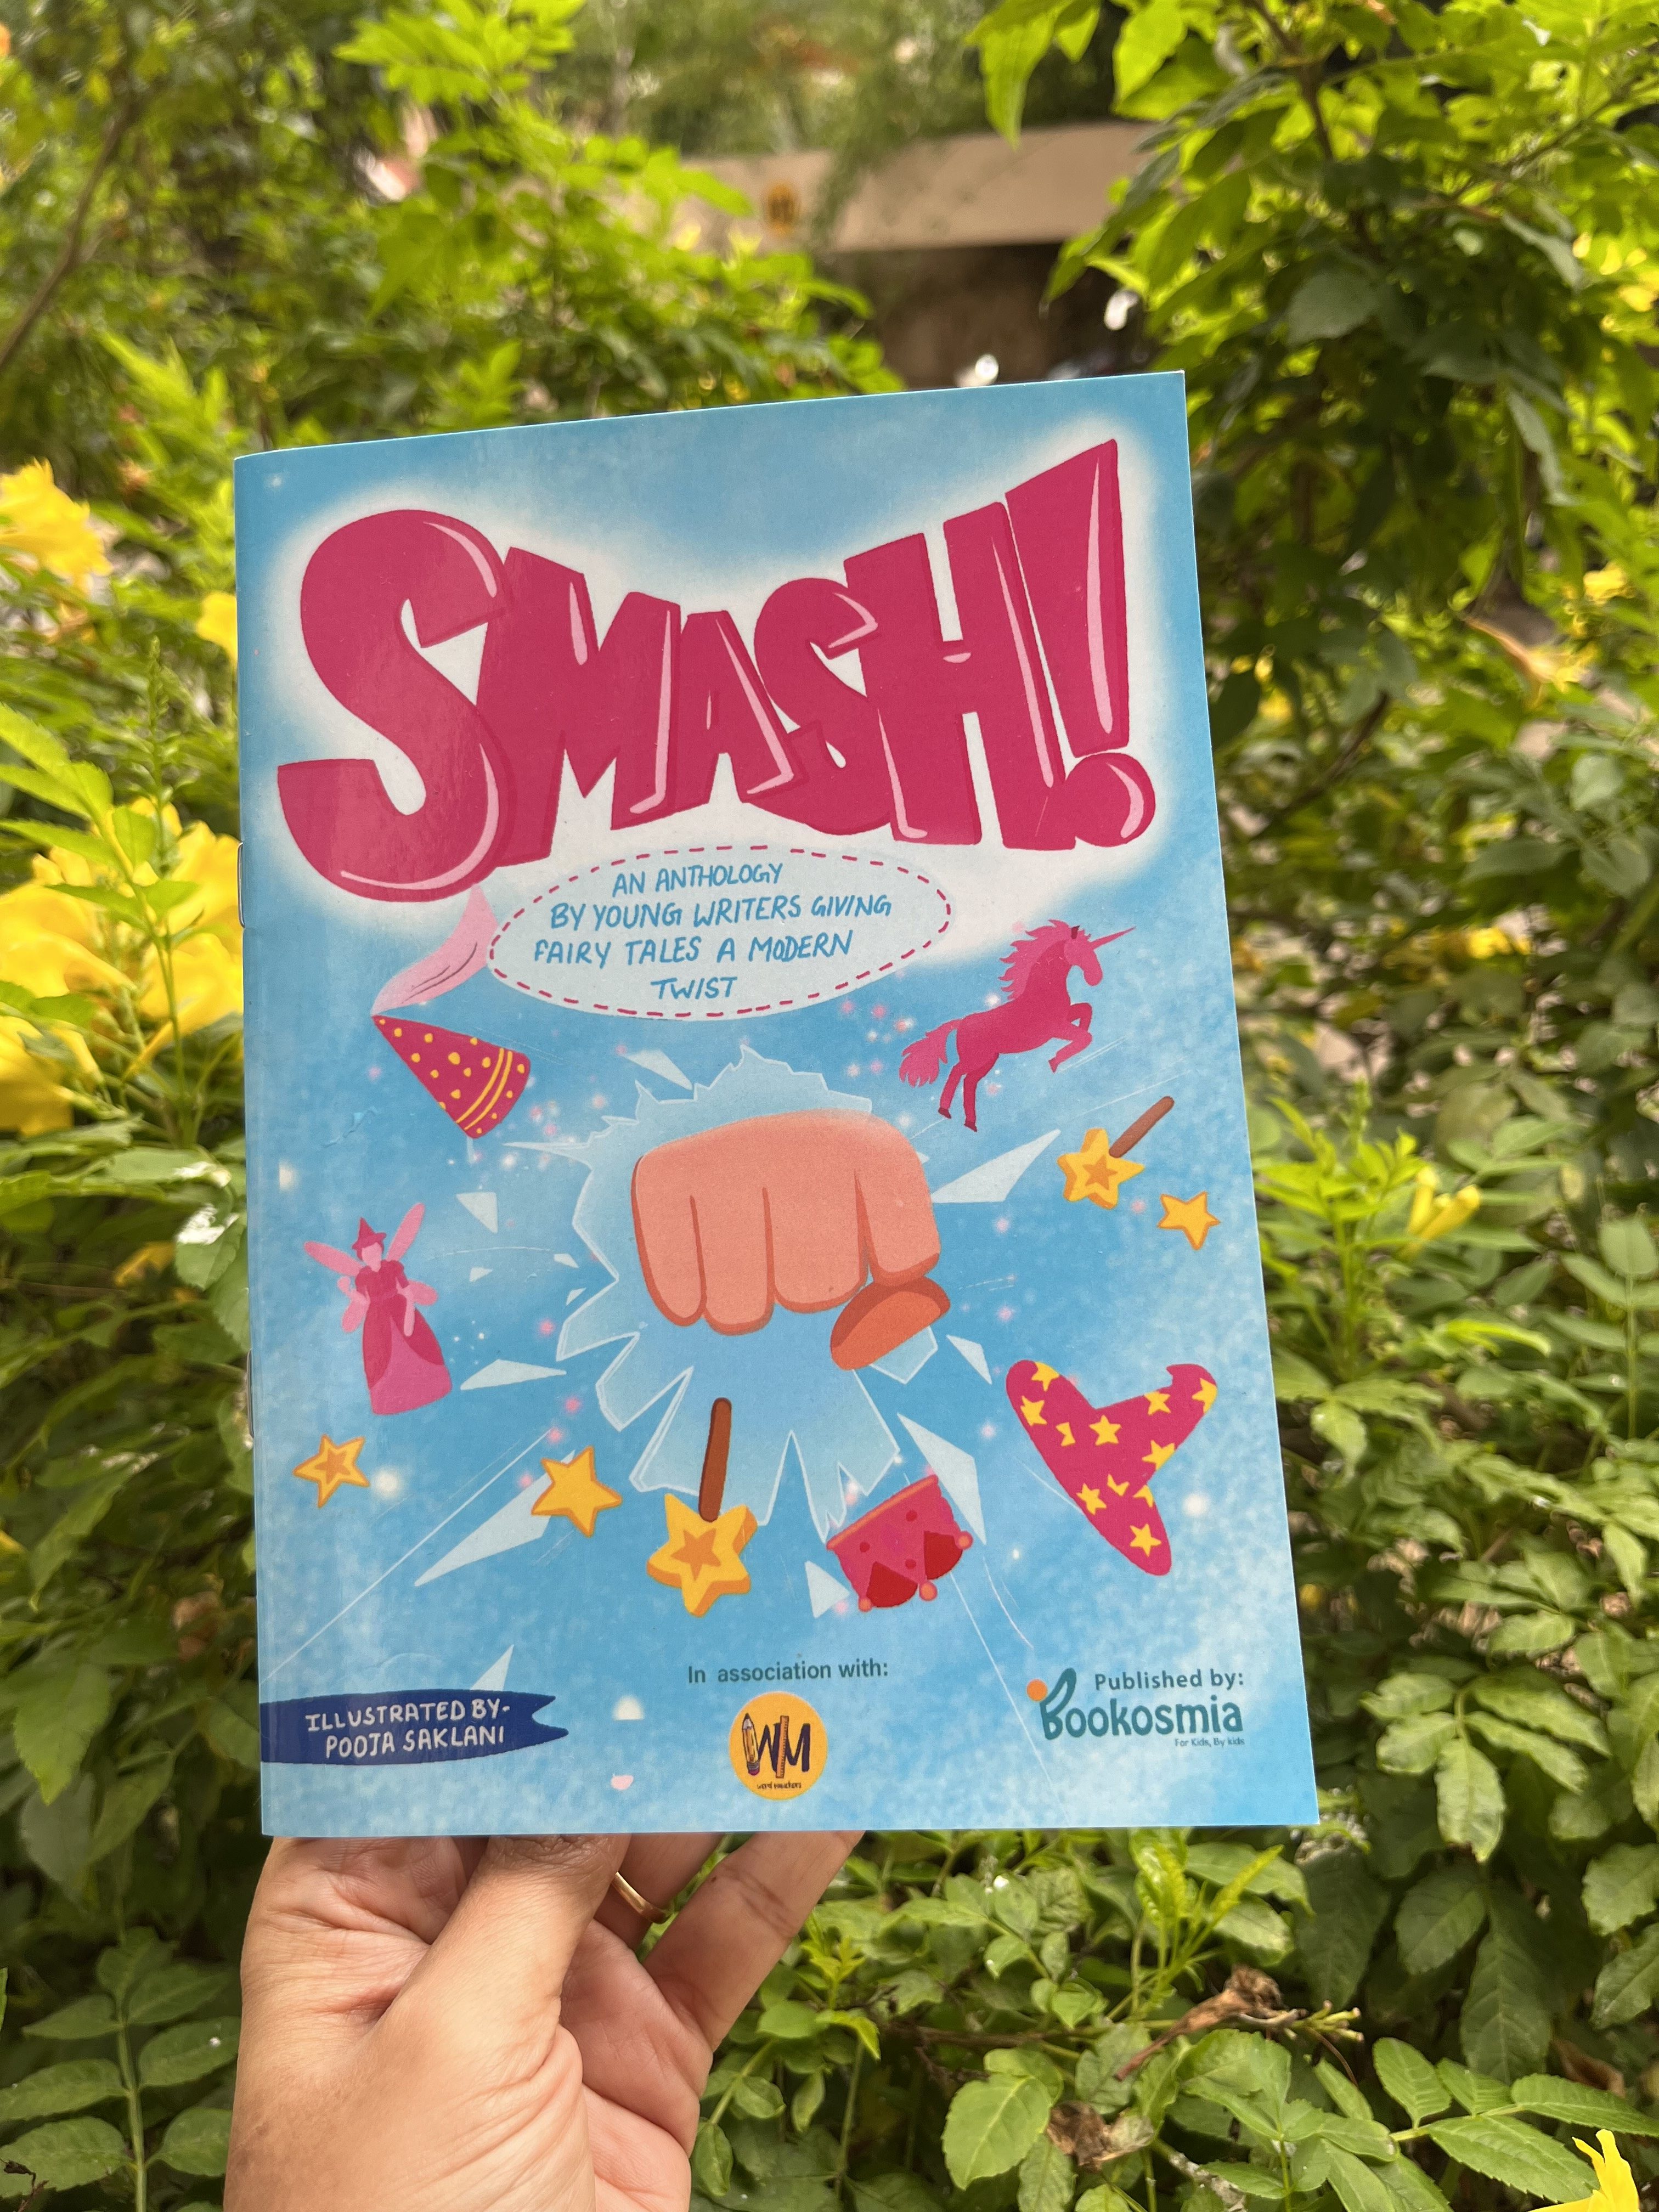 SMASH book for fairy tales with a twist